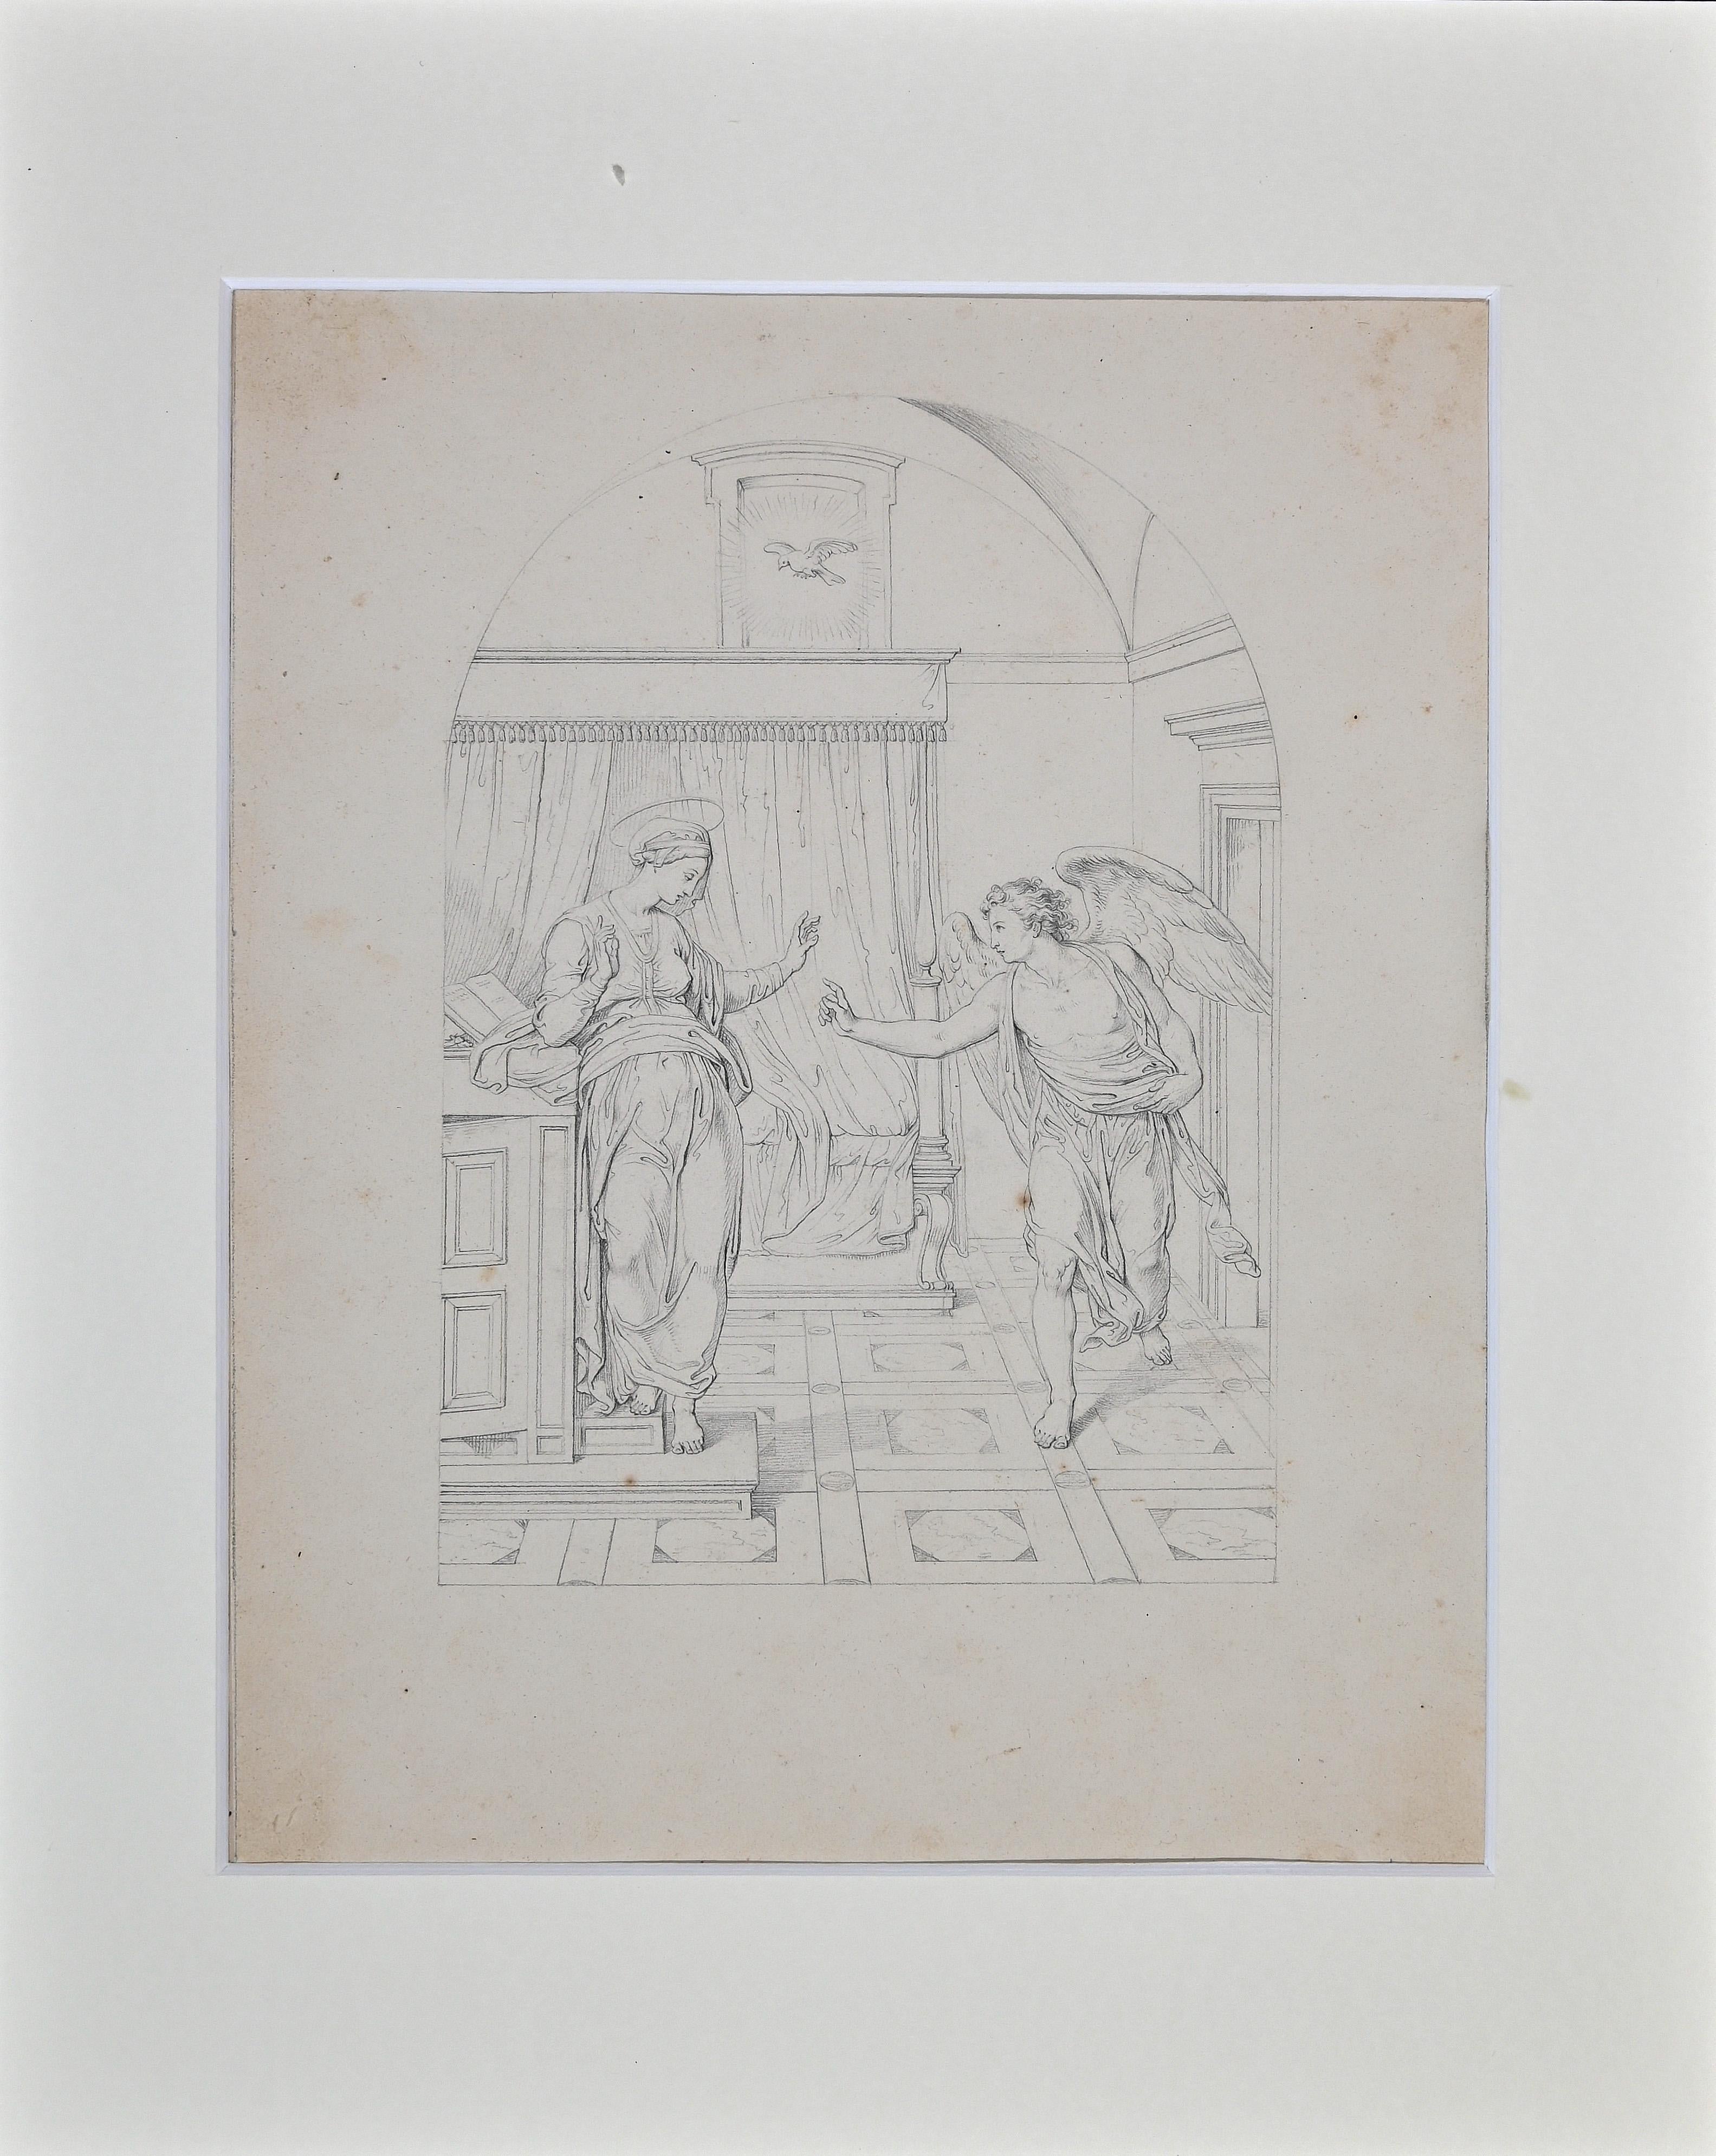 The announcement in S. Maria sopra Minerva is an original drawing in pencil on paper, realized by Giovanni Fontana.

The state of preservation of the artwork is good except for some stains.

Passepartout: 35.3 x 28 cm

Hand-signed in the lower right